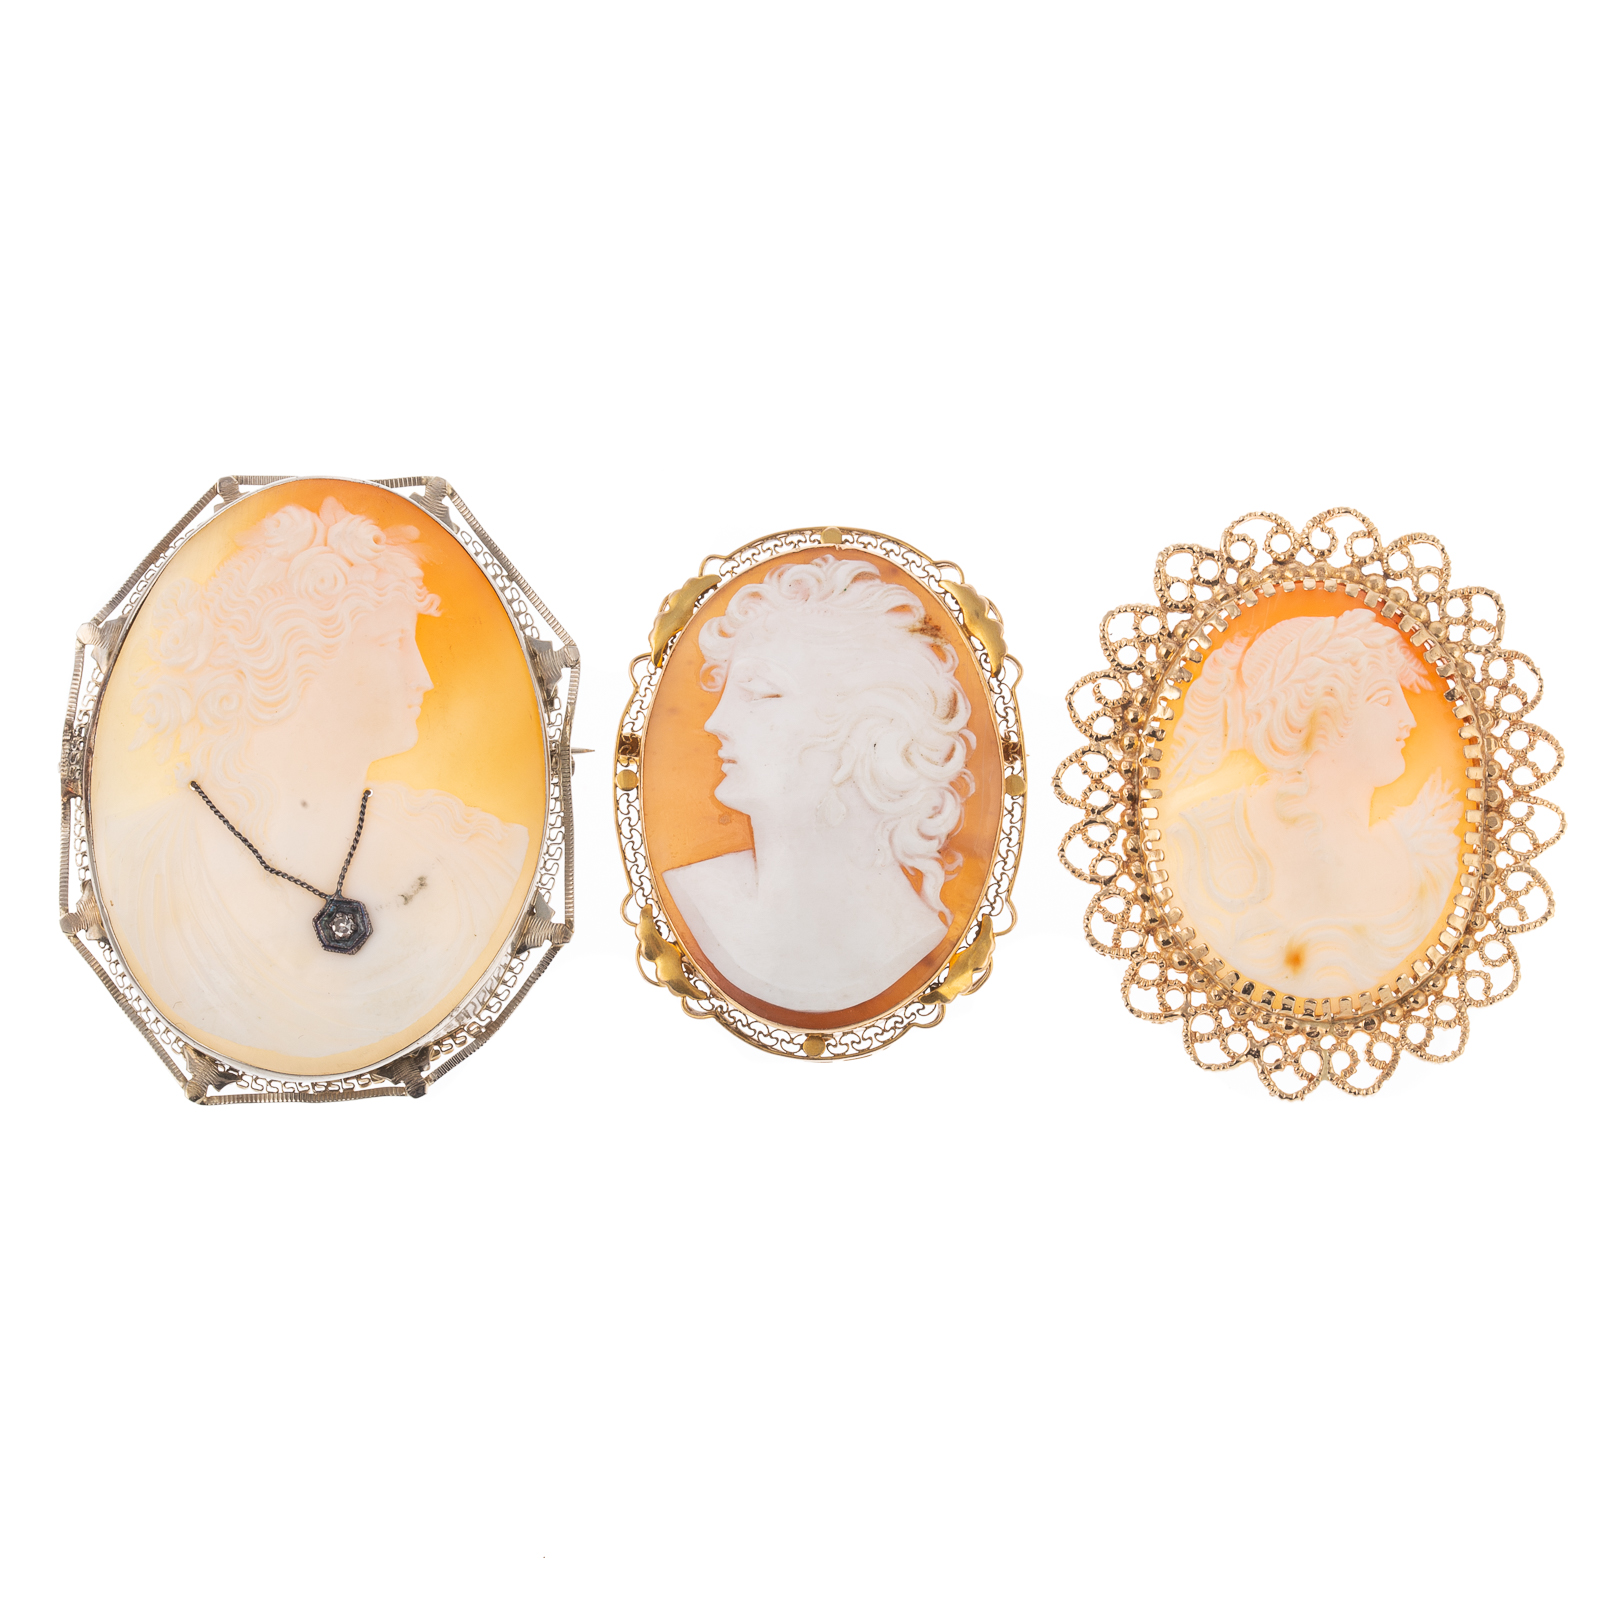 A TRIO OF SHELL CAMEO BROOCHES 2878ba